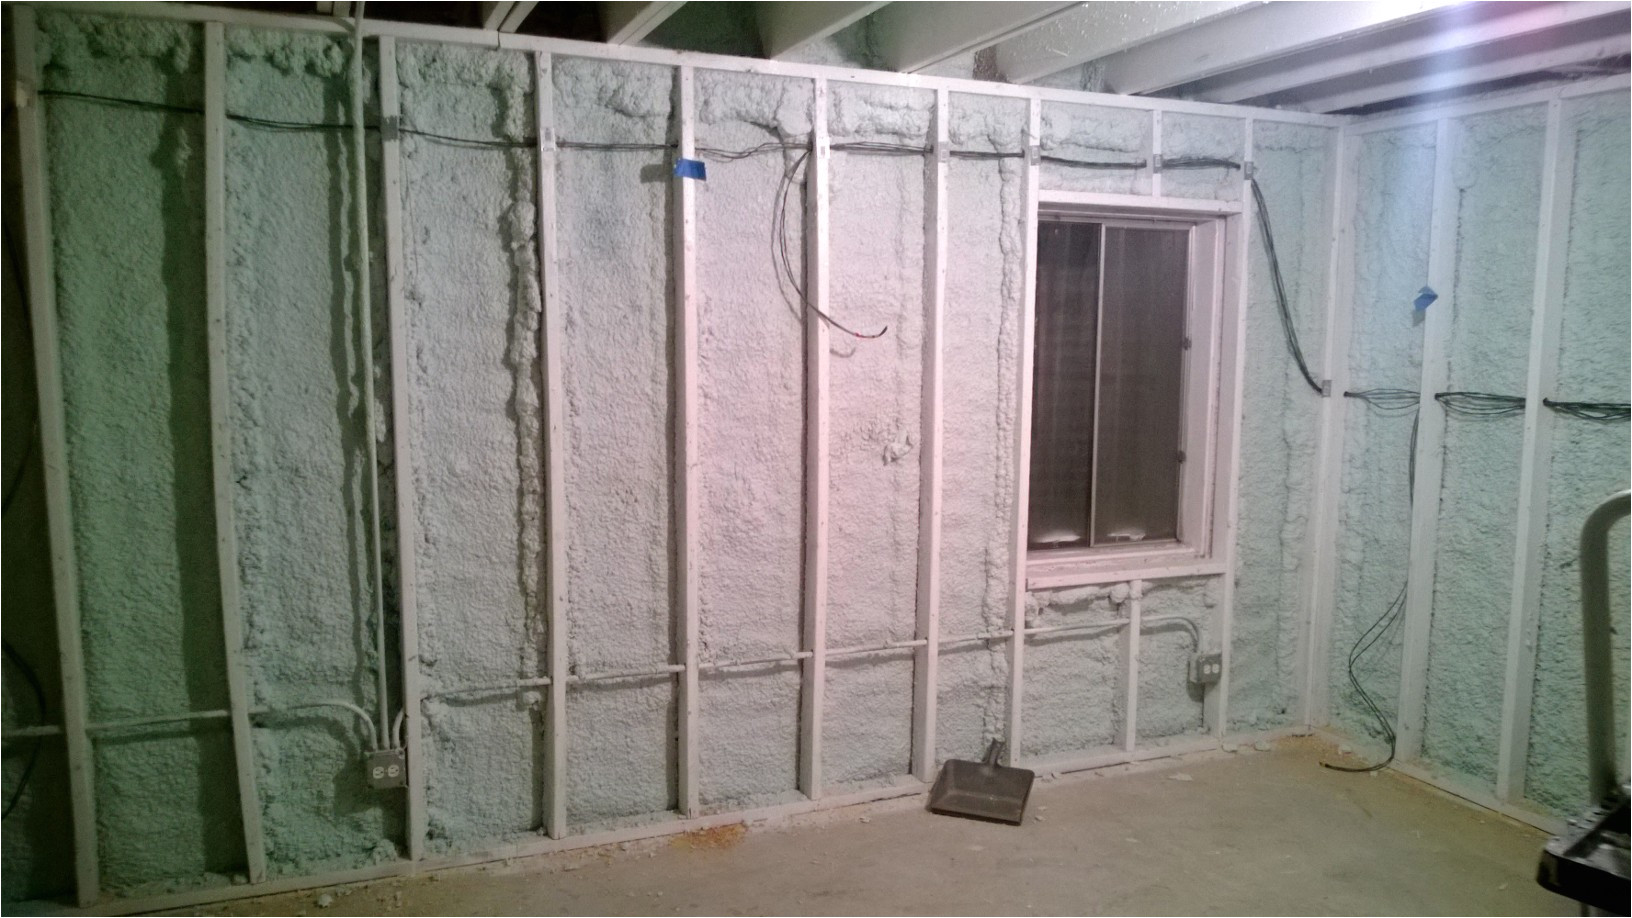 i finished my little project last thursday and i will tell you that your foam it green insulation was a lot easier to apply than i was expecting